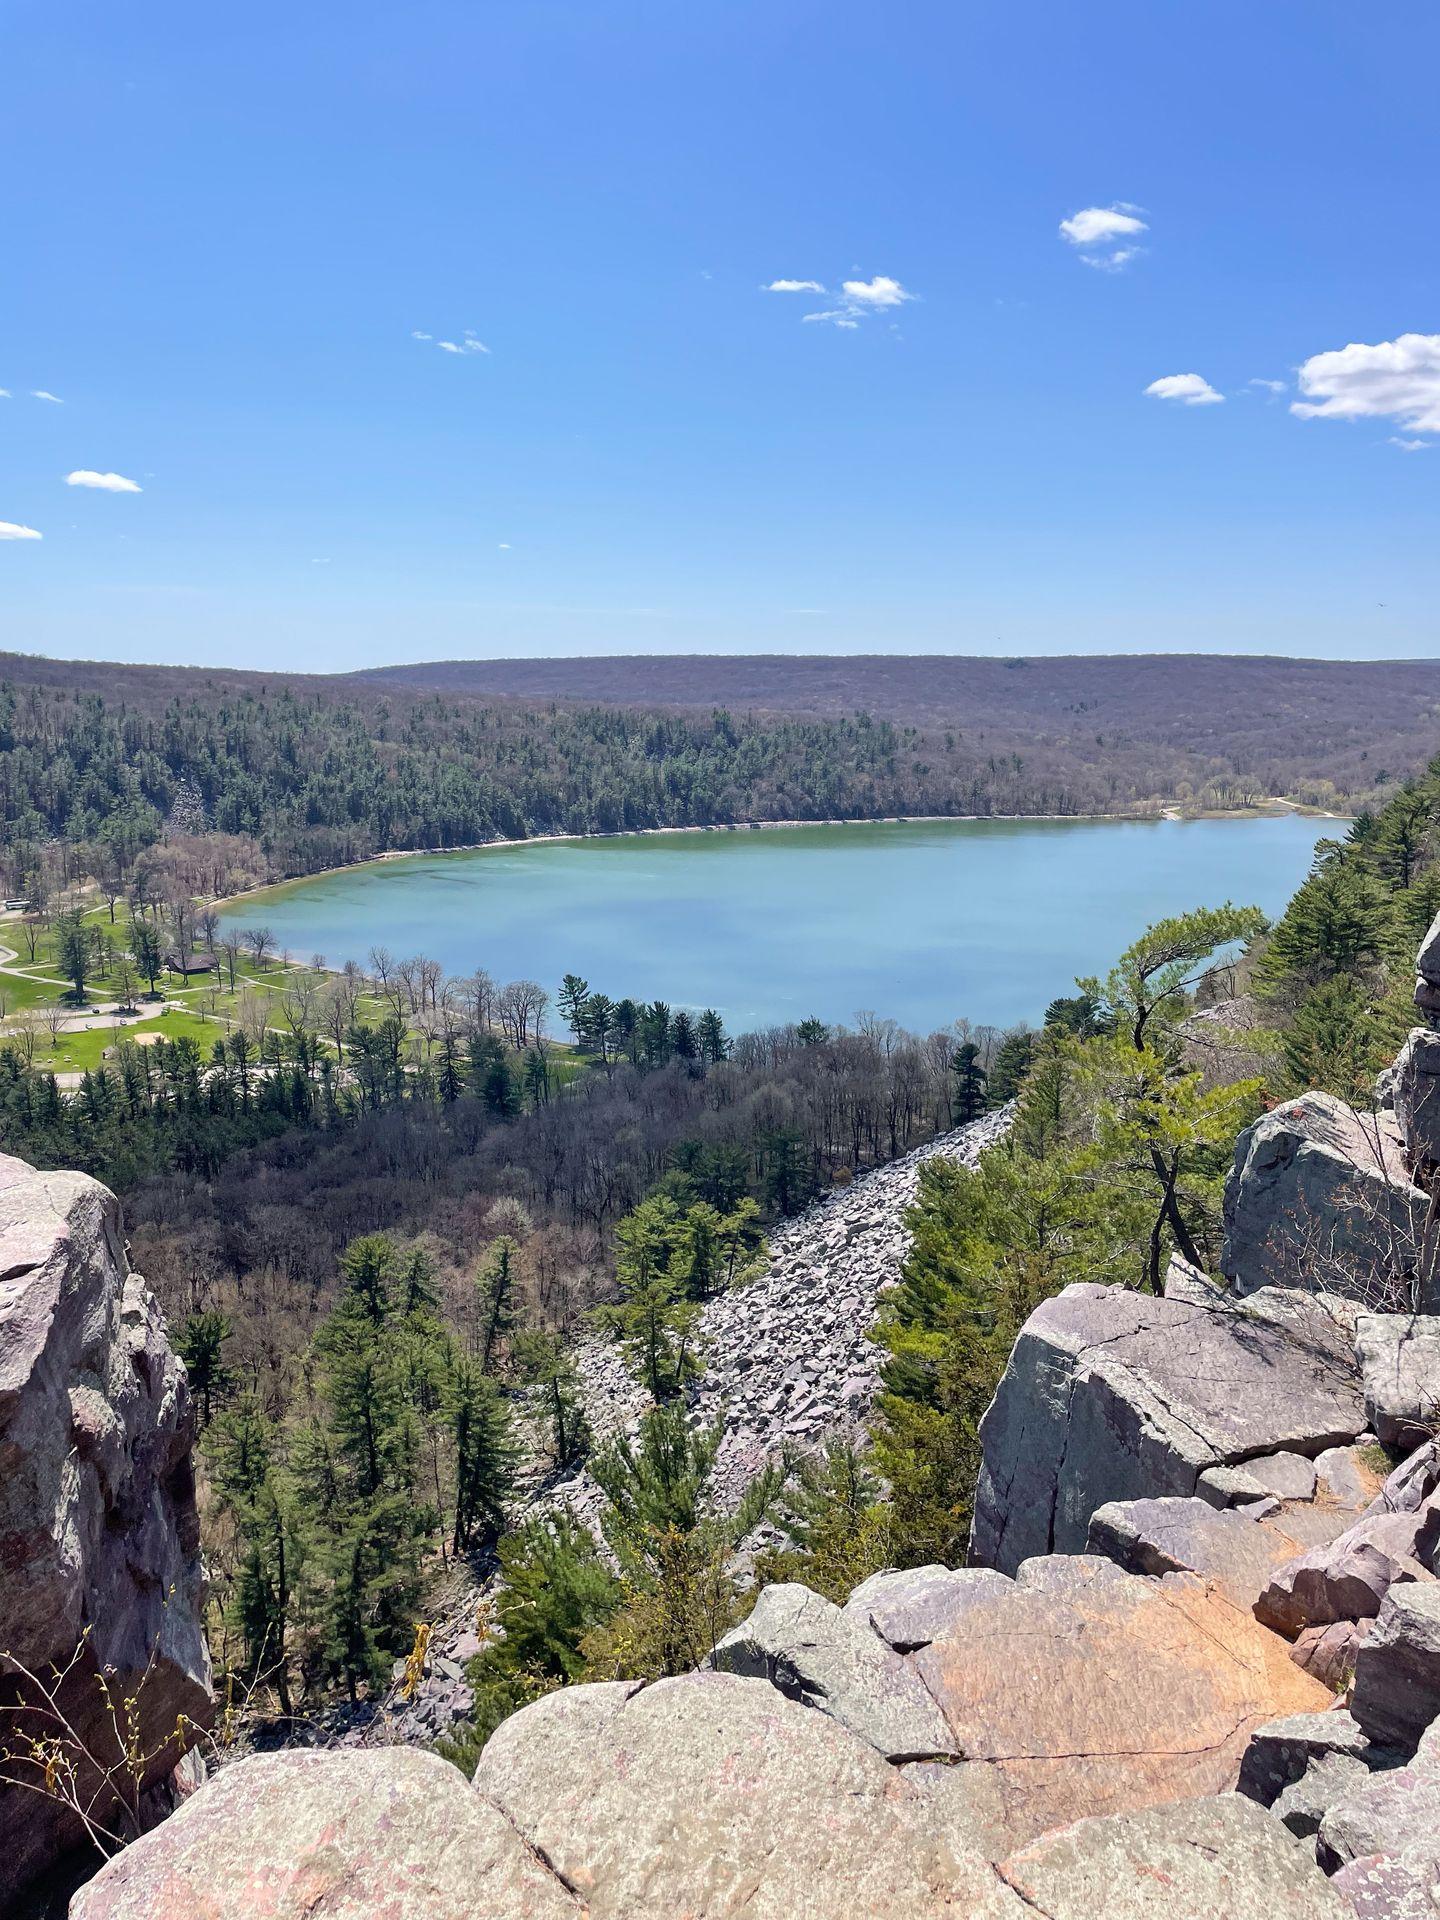 A view looking down at Devil's Lake from the East Bluff Trail in Devil's Lake State Park.